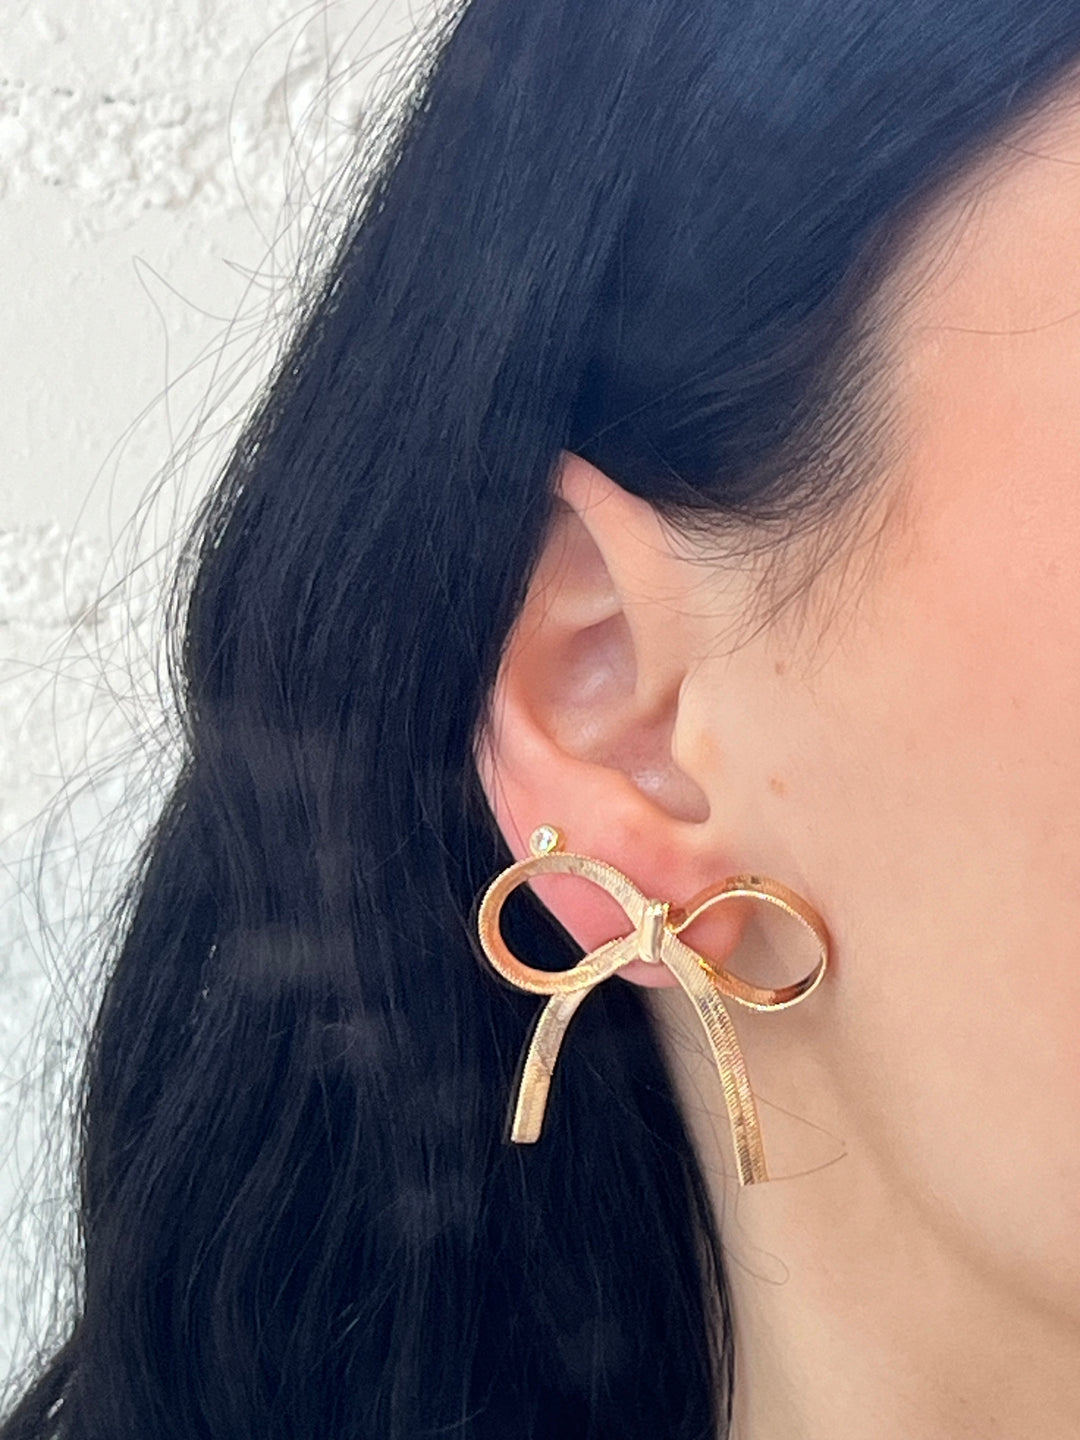 Betsy Bow Earrings, Jewelry, Adeline, Adeline, dallas boutique, dallas texas, texas boutique, women's boutique dallas, adeline boutique, dallas boutique, trendy boutique, affordable boutique